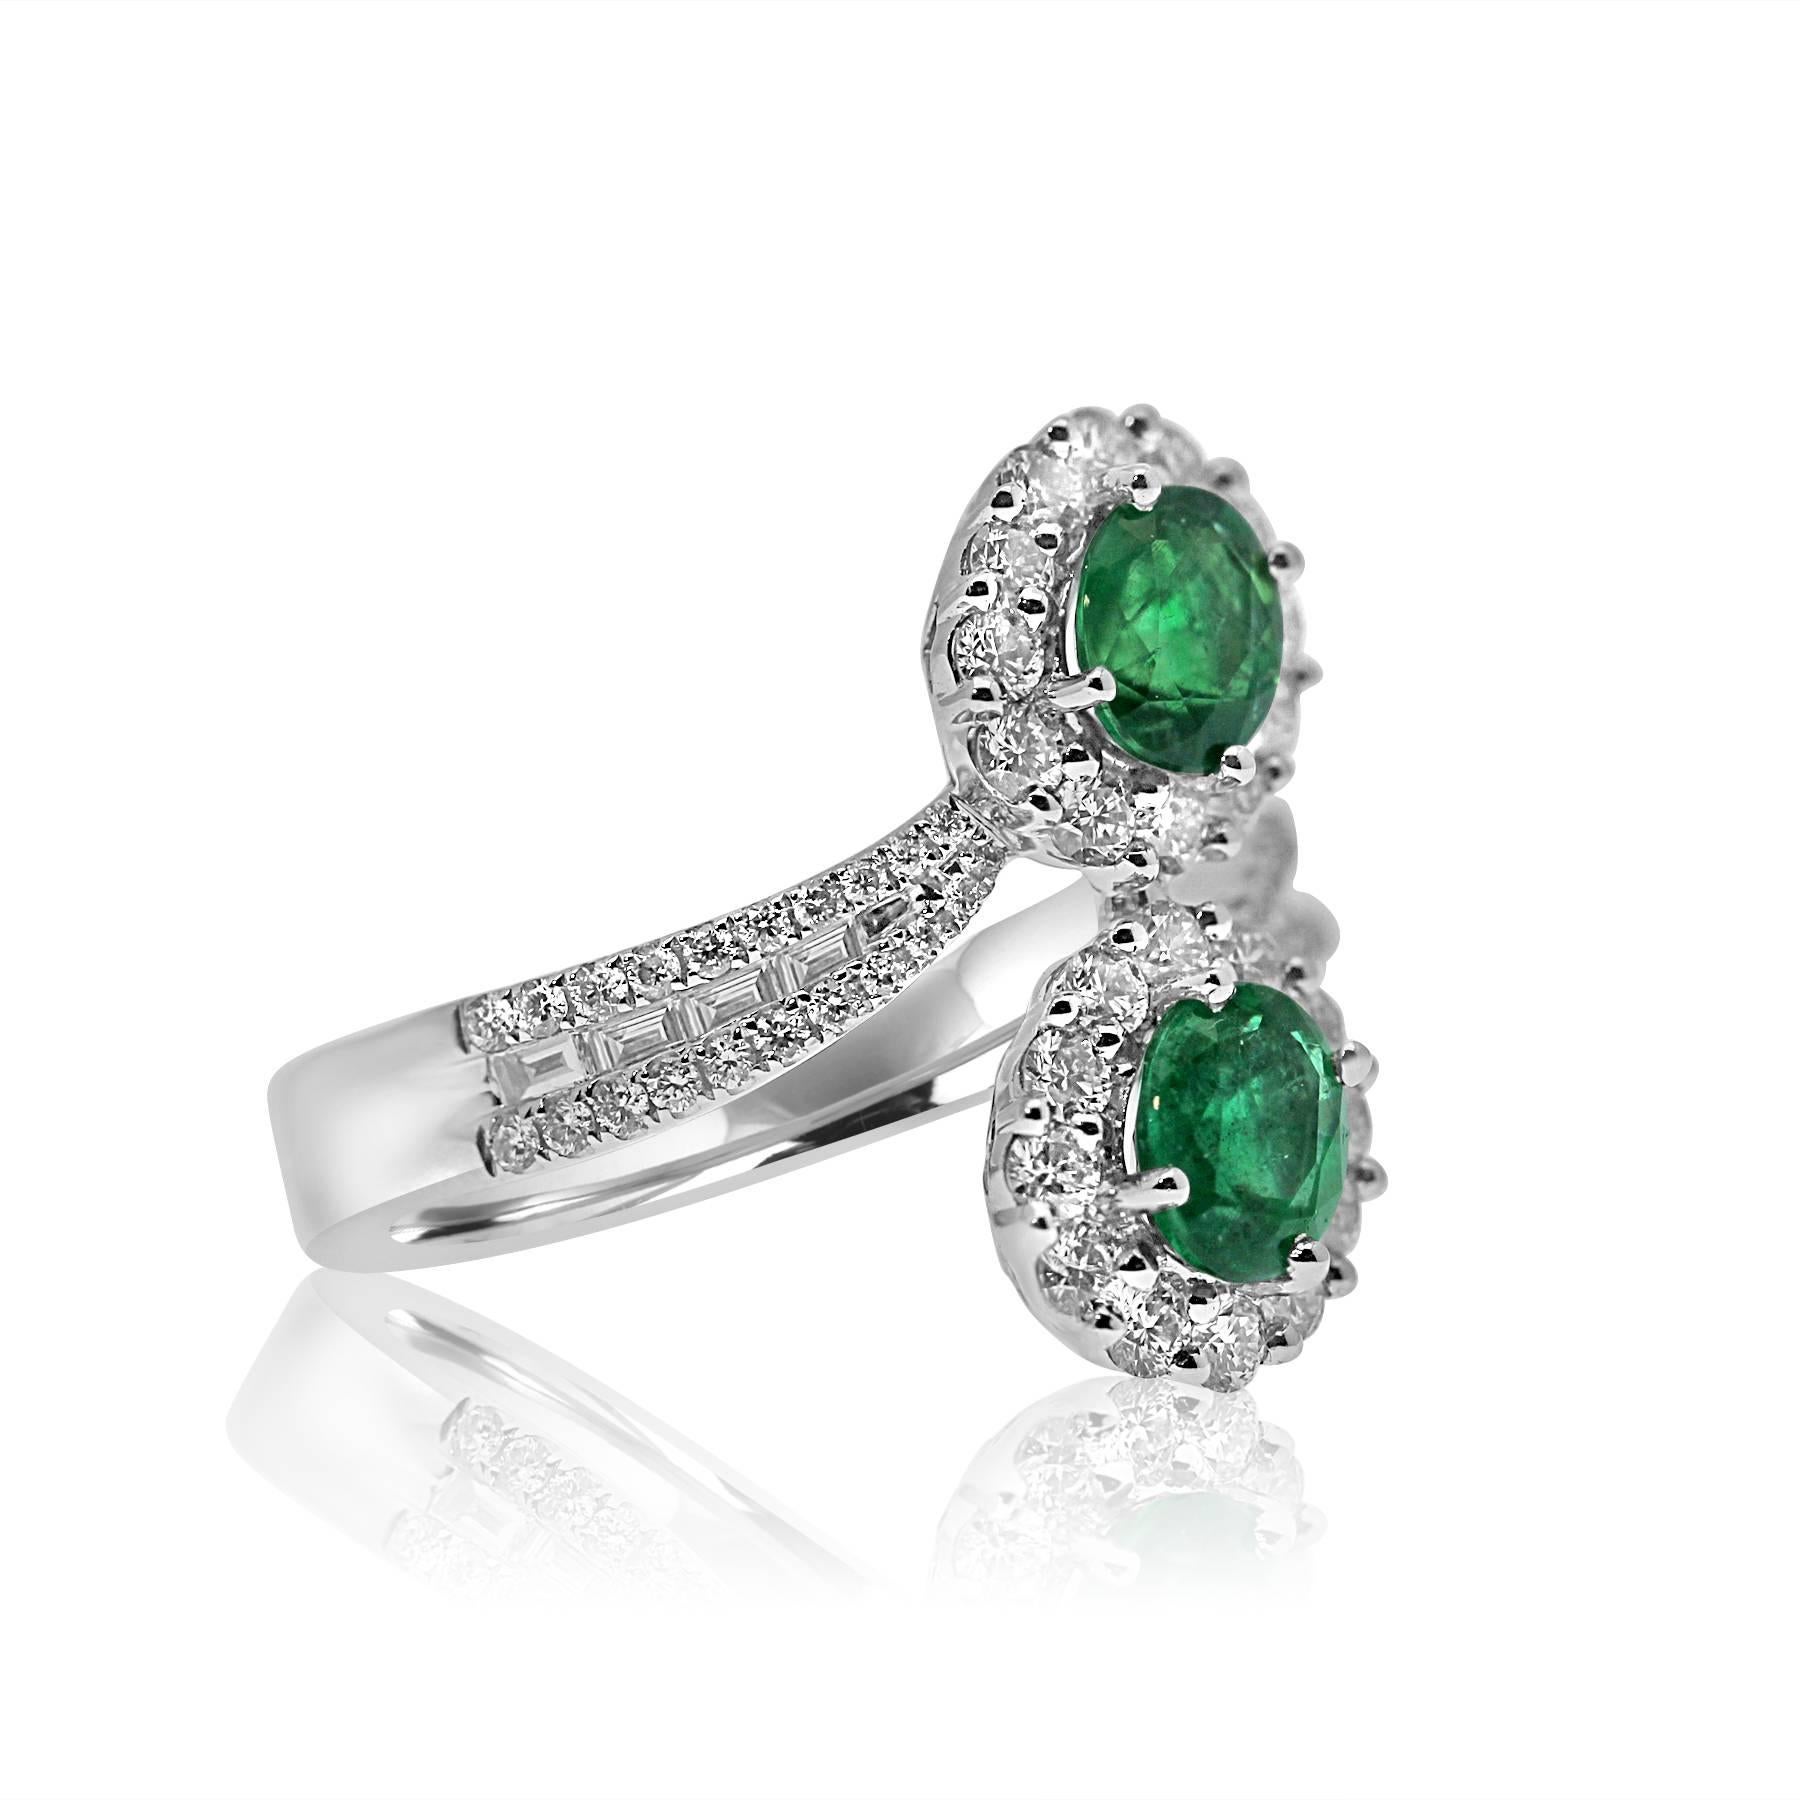 platinum  ring featuring two green emerald gemstones of 1.21ct total in a design called toi-et-moi which means me and you together forever.
surrounded by degraded brilliant and baguette cut diamonds of 1.05ct total to give an extra sparkly finish